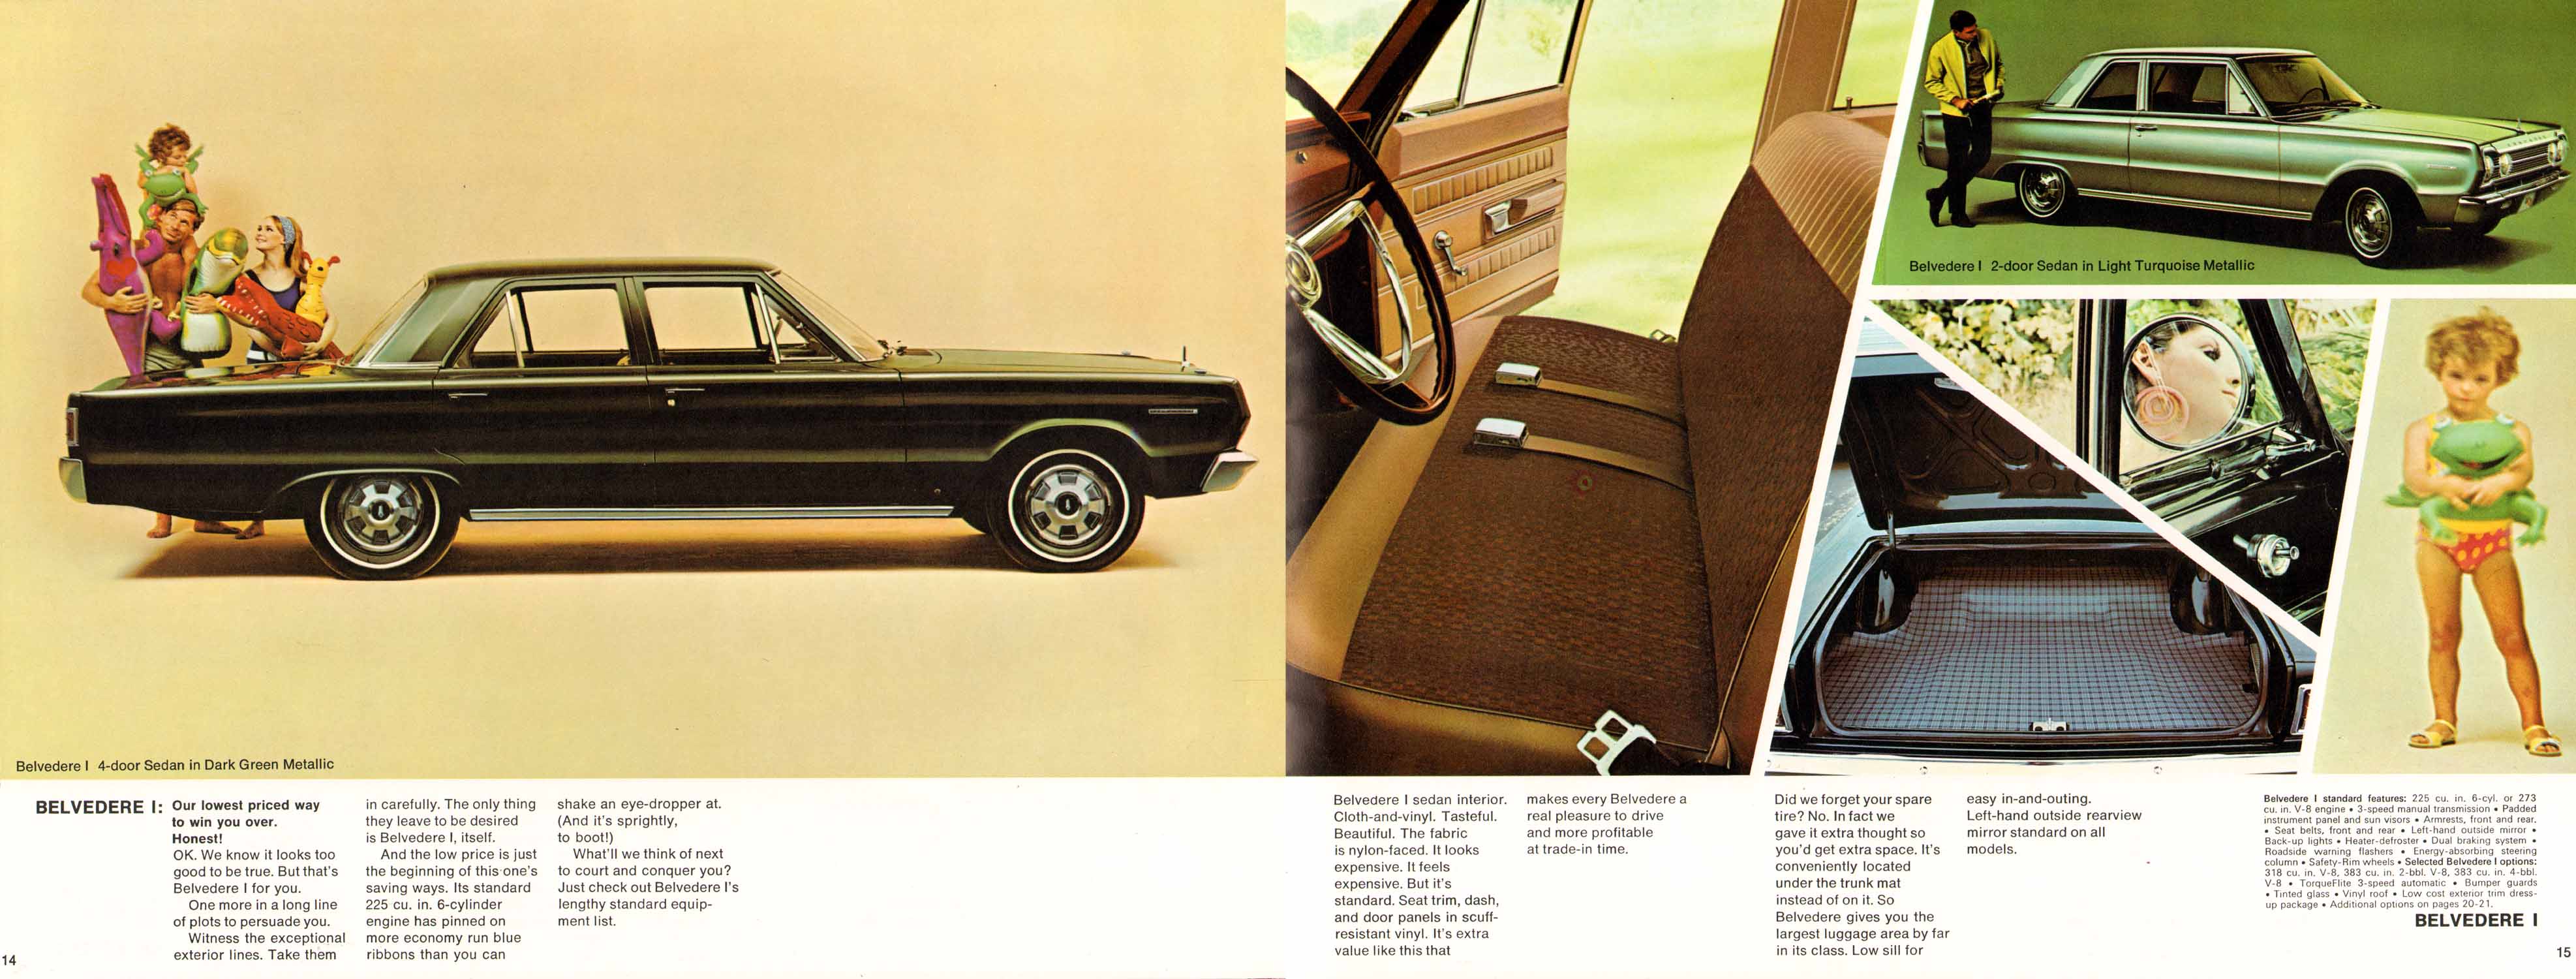 1967_Plymouth_Belvedere-14-15